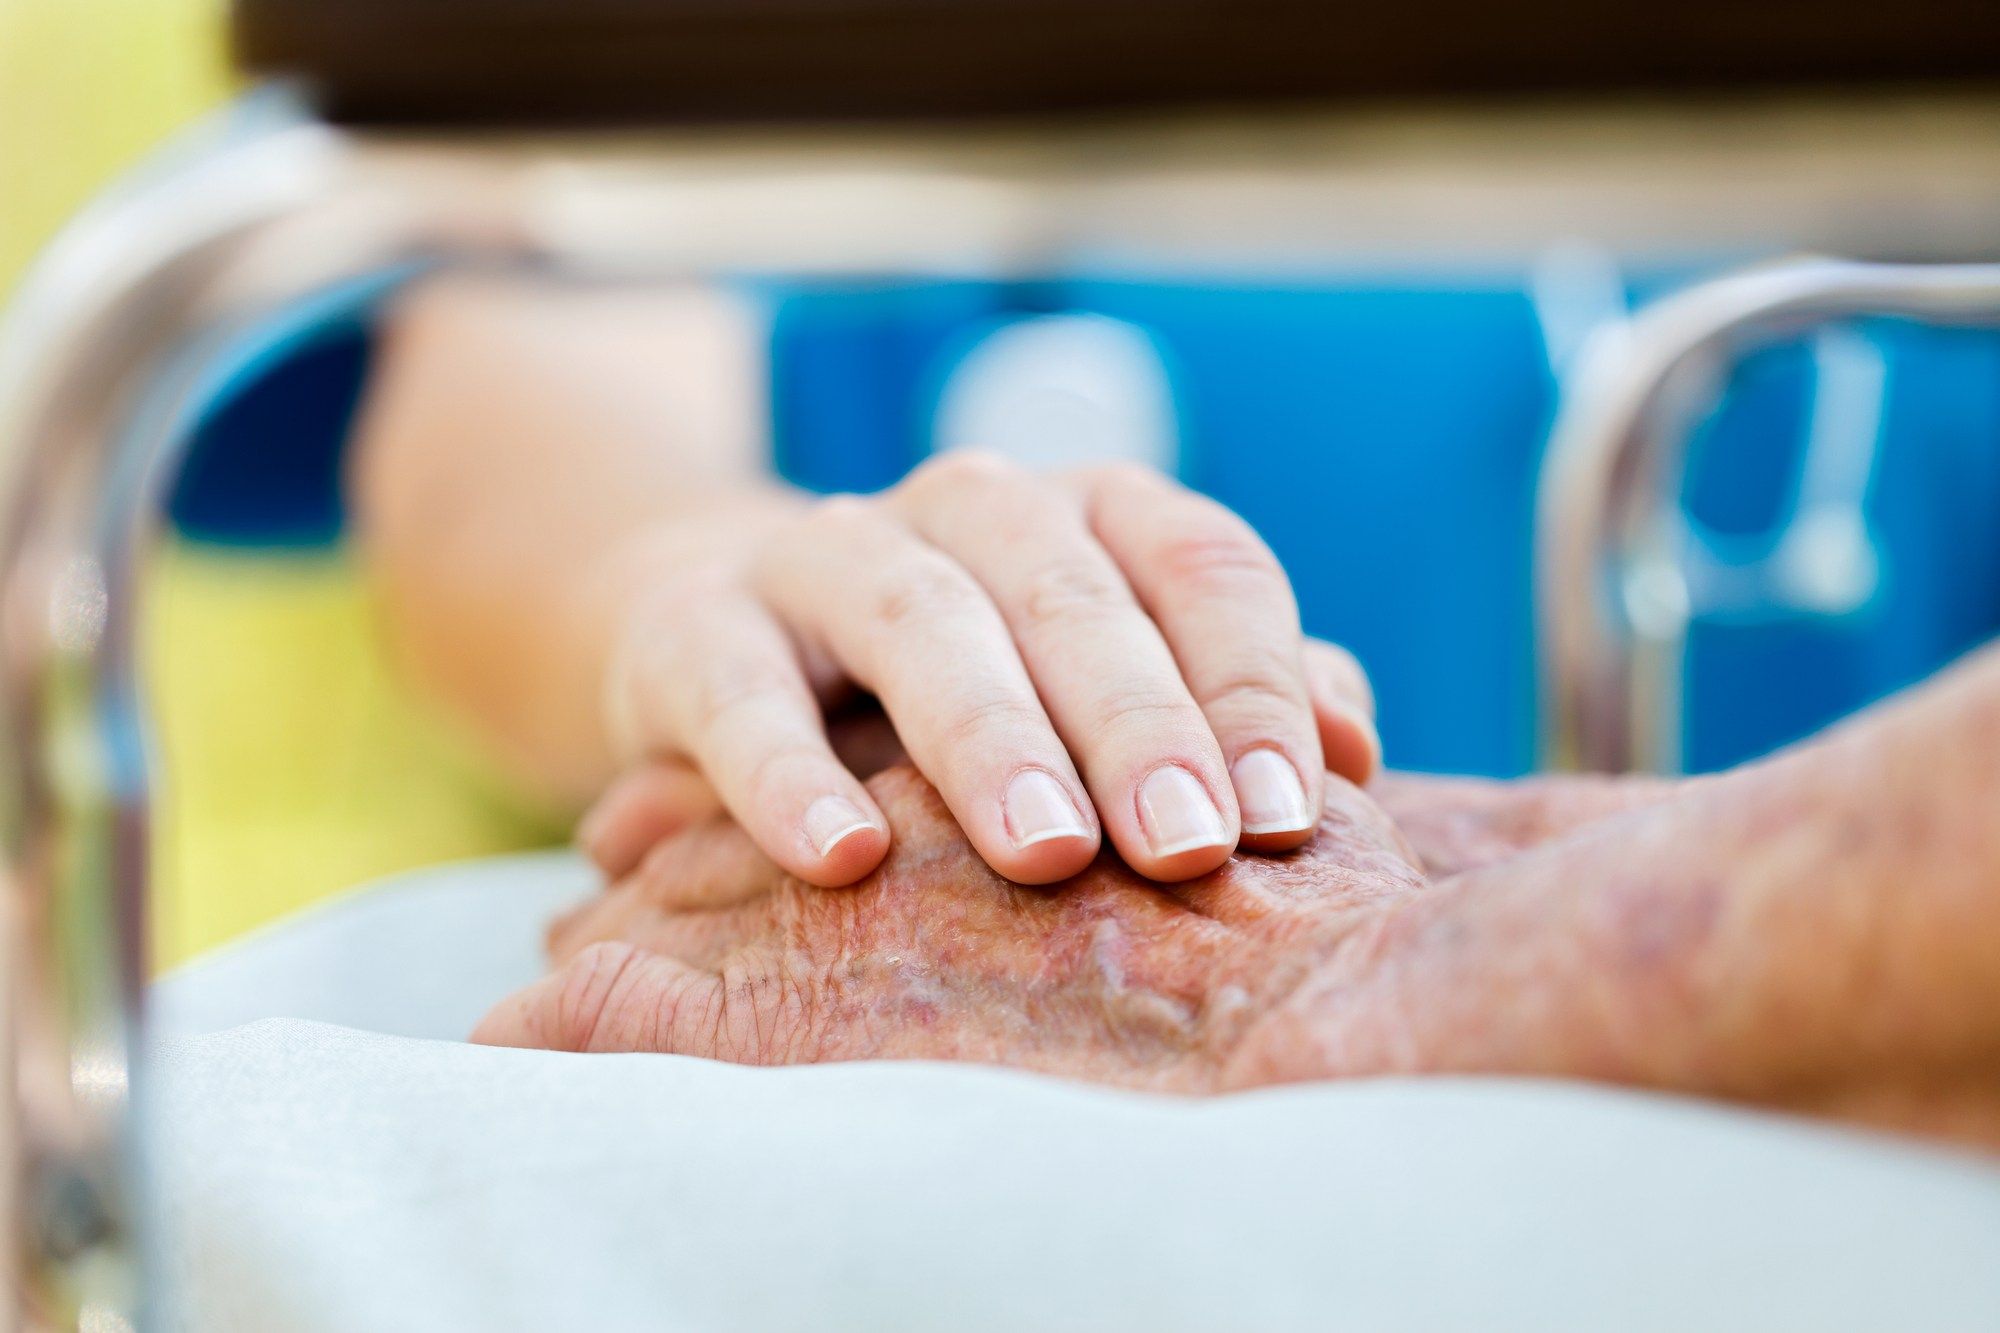 Are nursing homes liable for COVID-19 nursing home deaths?